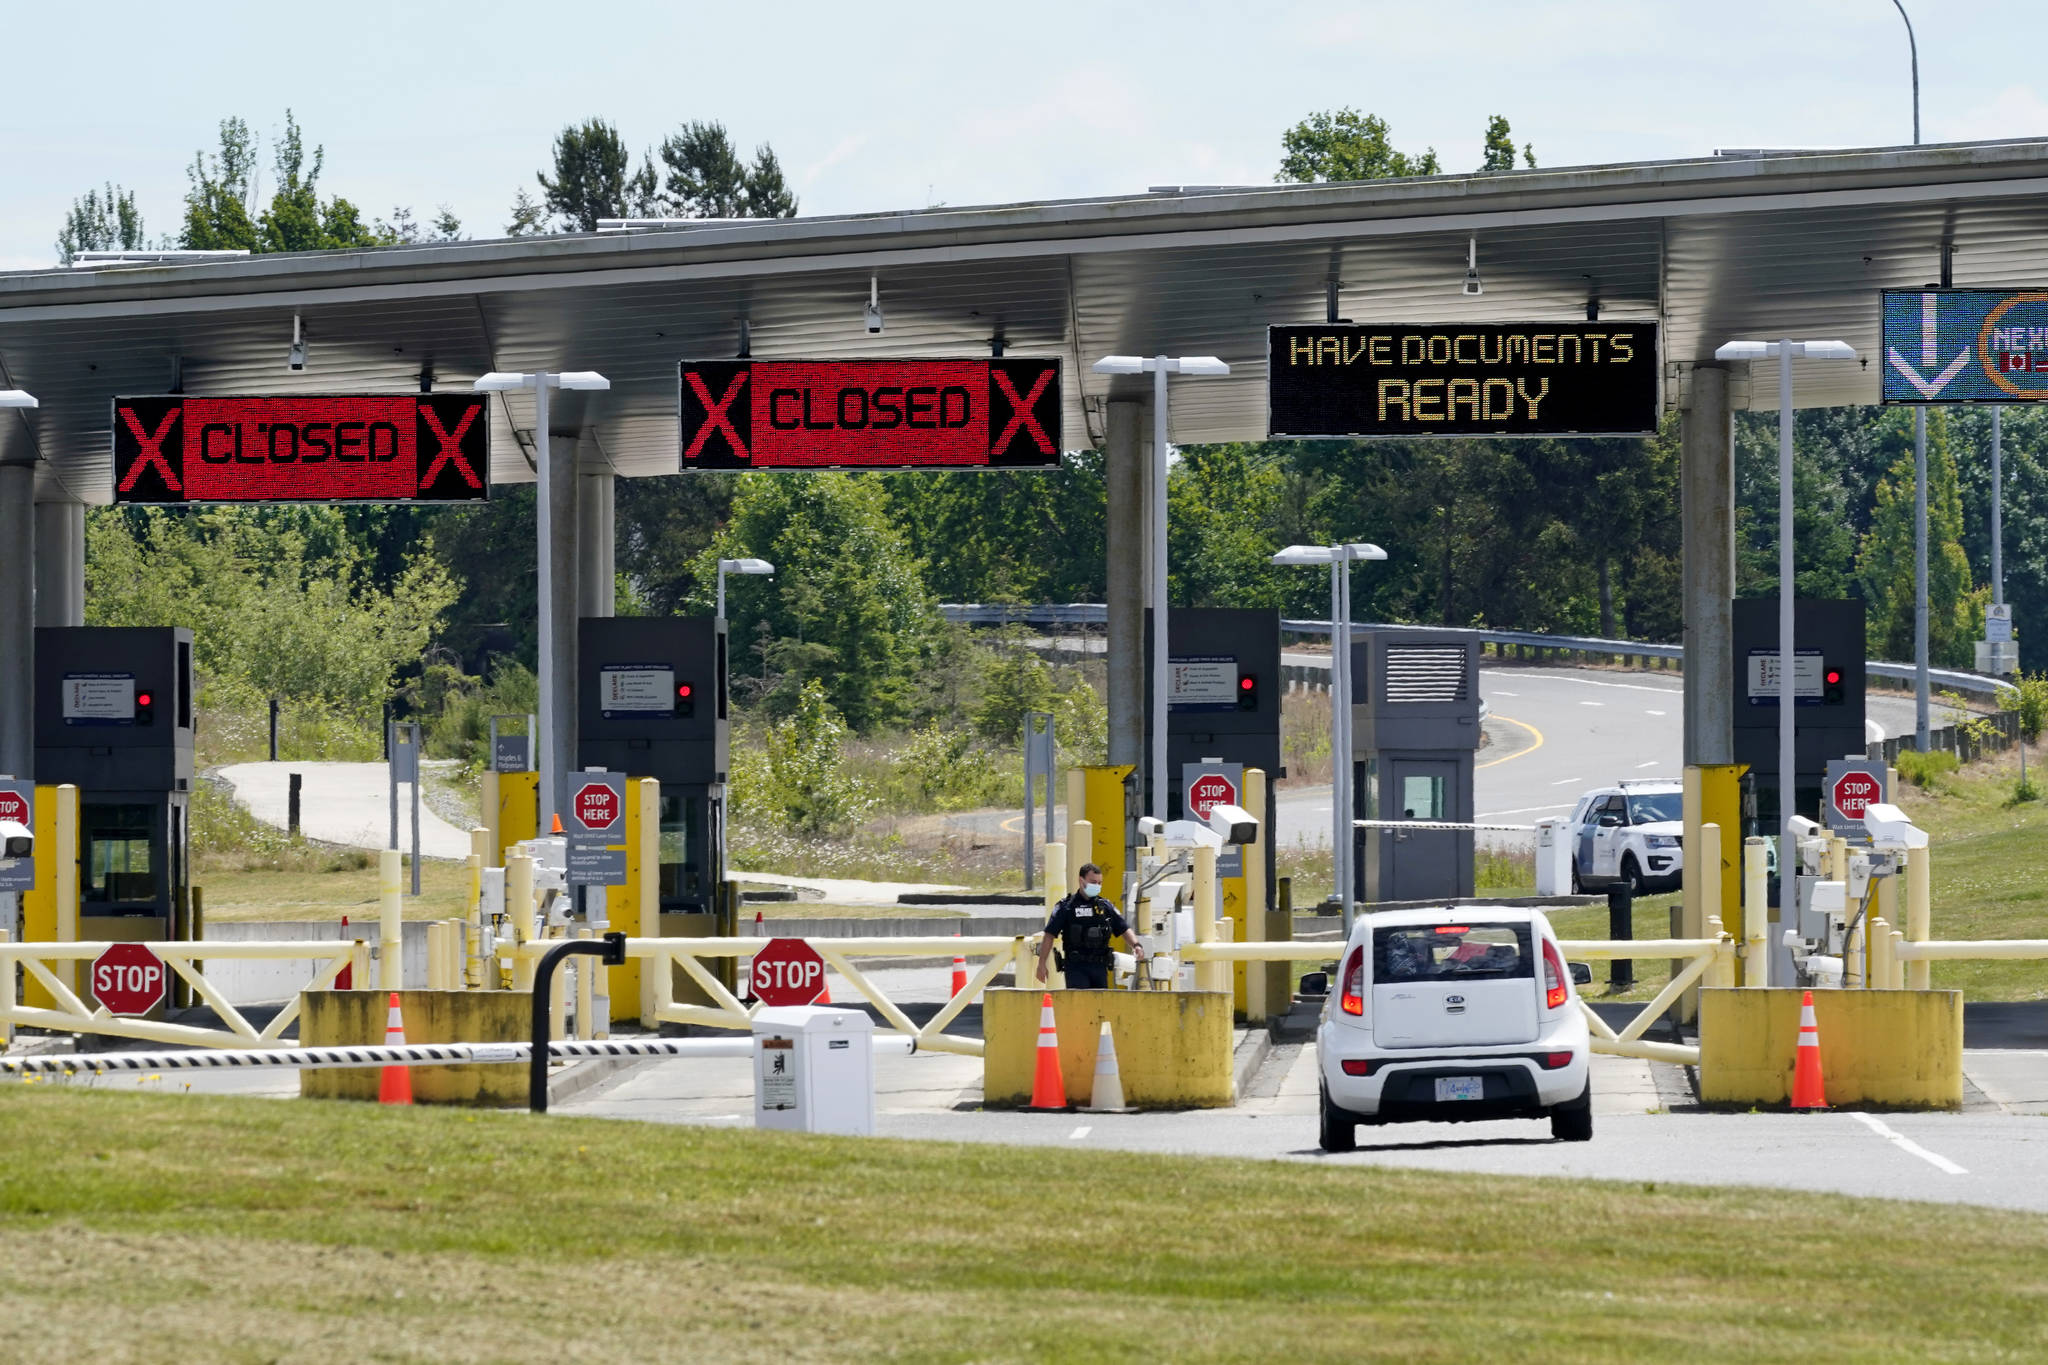 FILE - In this June 8, 2021, file photo, a car approaches one of the few lanes open at the Peace Arch border crossing into the U.S. in Blaine, Wash. Canada is lifting its prohibition Monday, Aug. 9 on Americans crossing the border to shop, vacation or visit, but the United States is keeping similar restrictions in place for Canadians. The reopening is part of a bumpy return to normalcy from COVID-19 travel bans.  (AP Photo/Elaine Thompson, File)